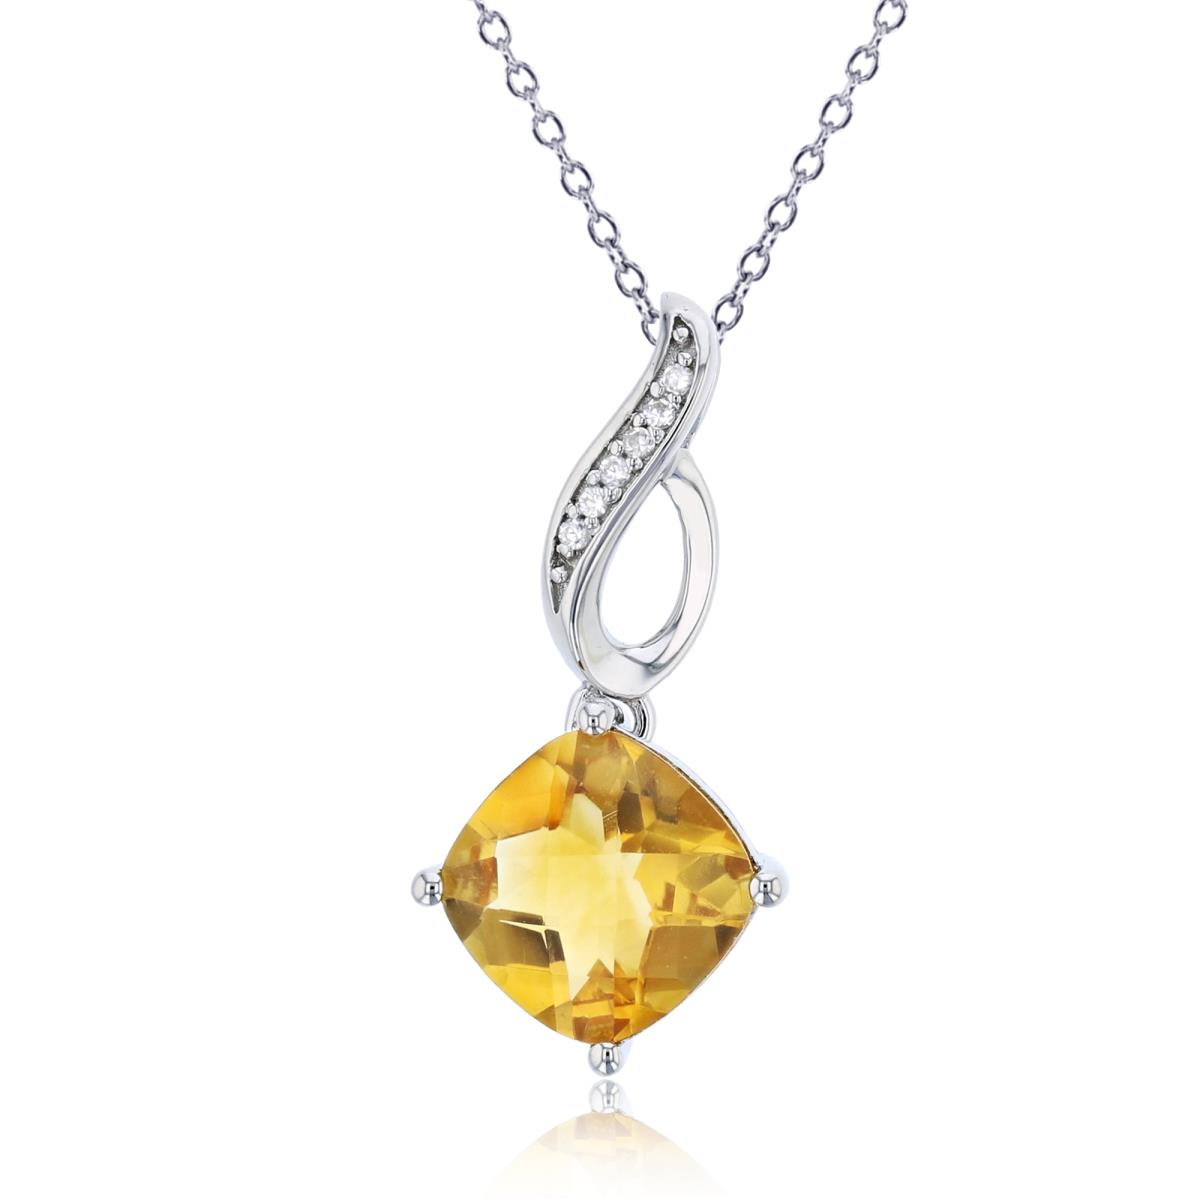 14K Yellow Gold 0.03cttw Rnd Diamonds & 9mm Cushion Citrine Dangling 18"Necklace